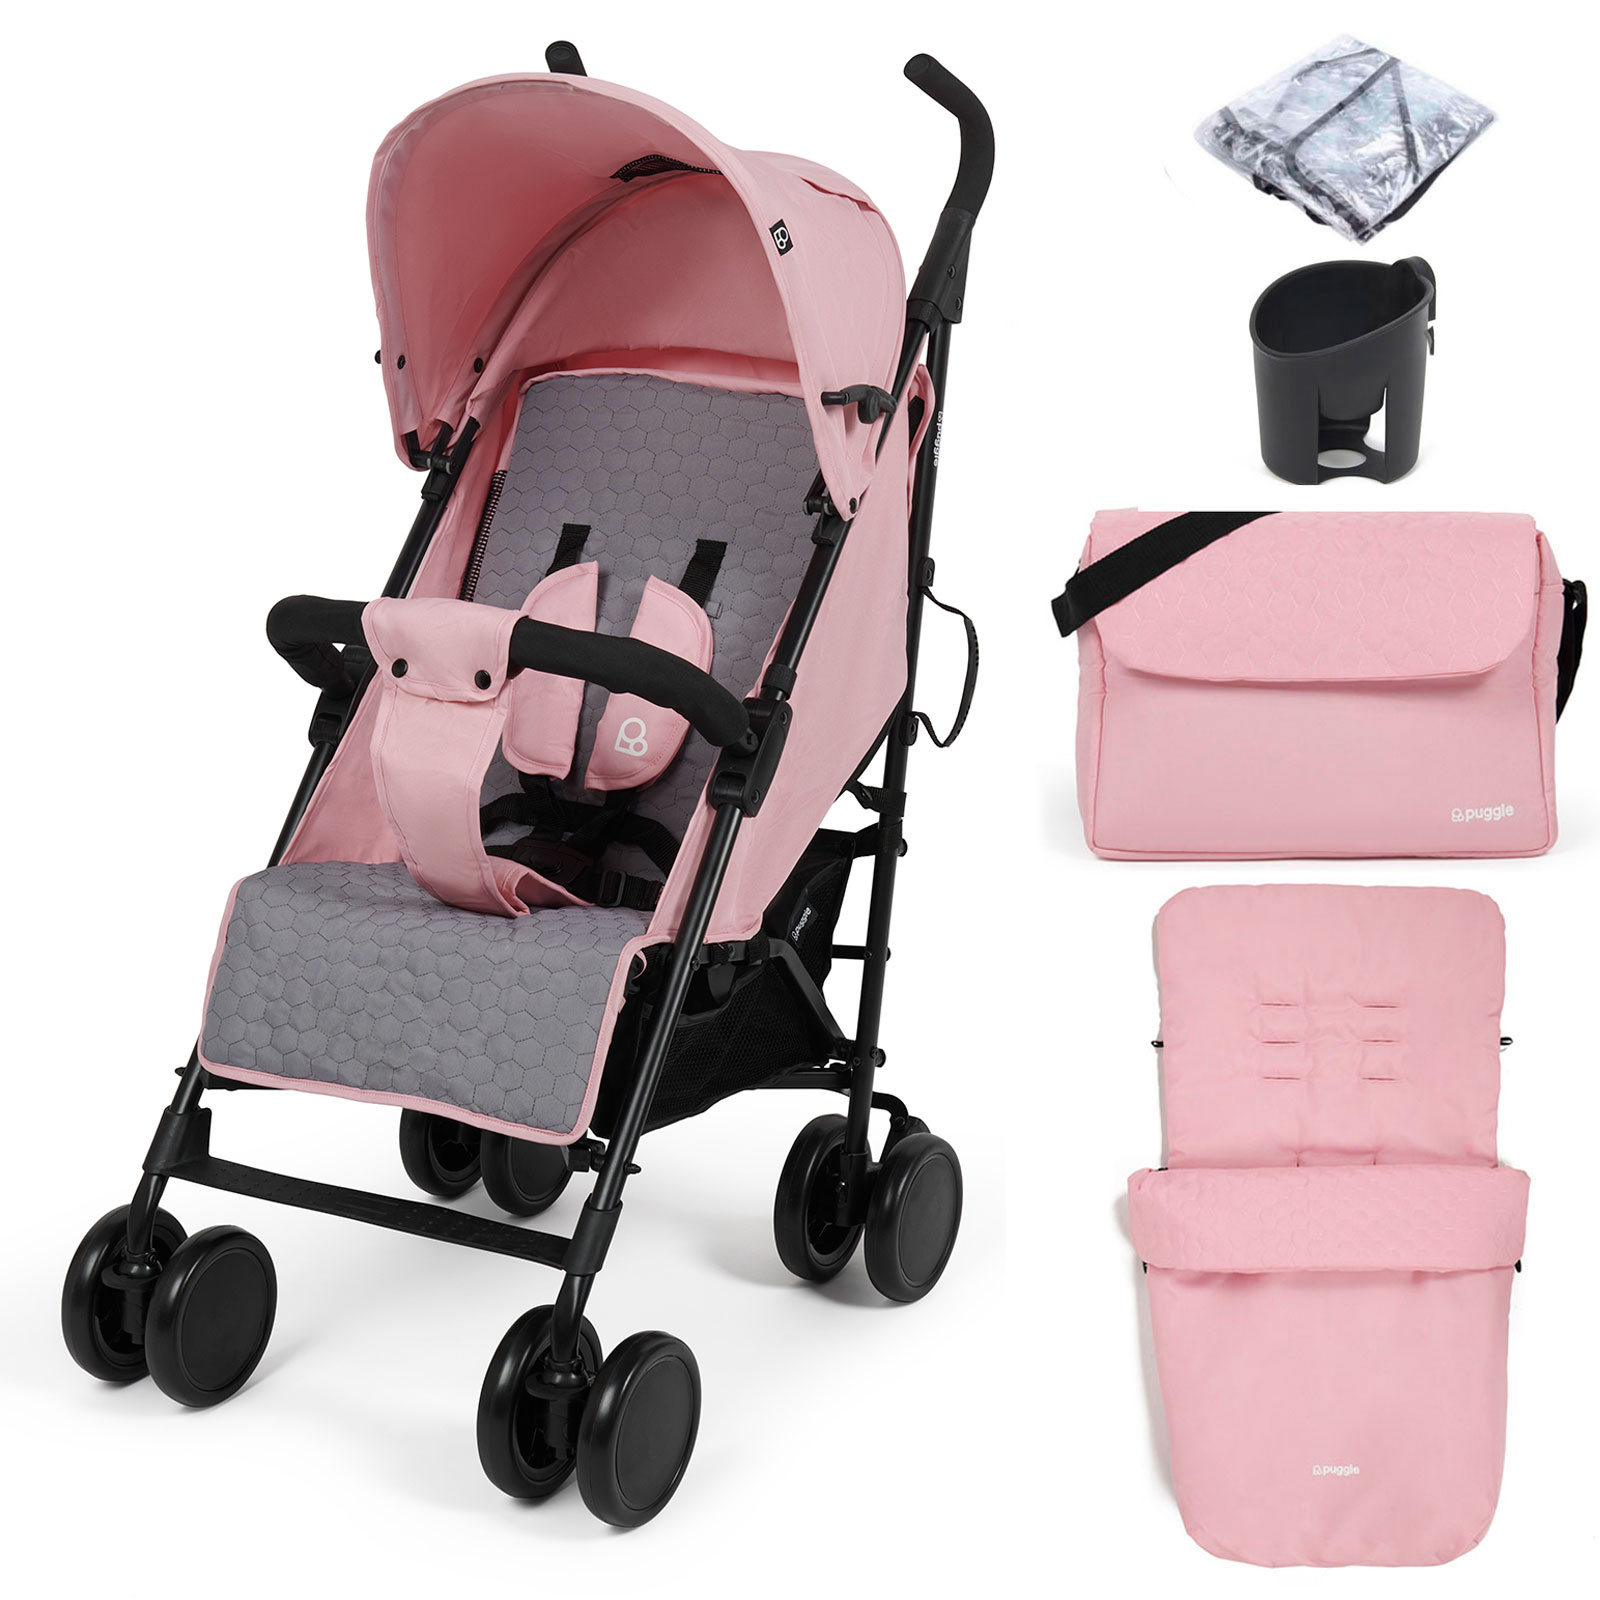 Puggle Litemax Pushchair Stroller with Raincover, Cupholder, Universal Footmuff and Changing Bag with Mat - Vintage Pink